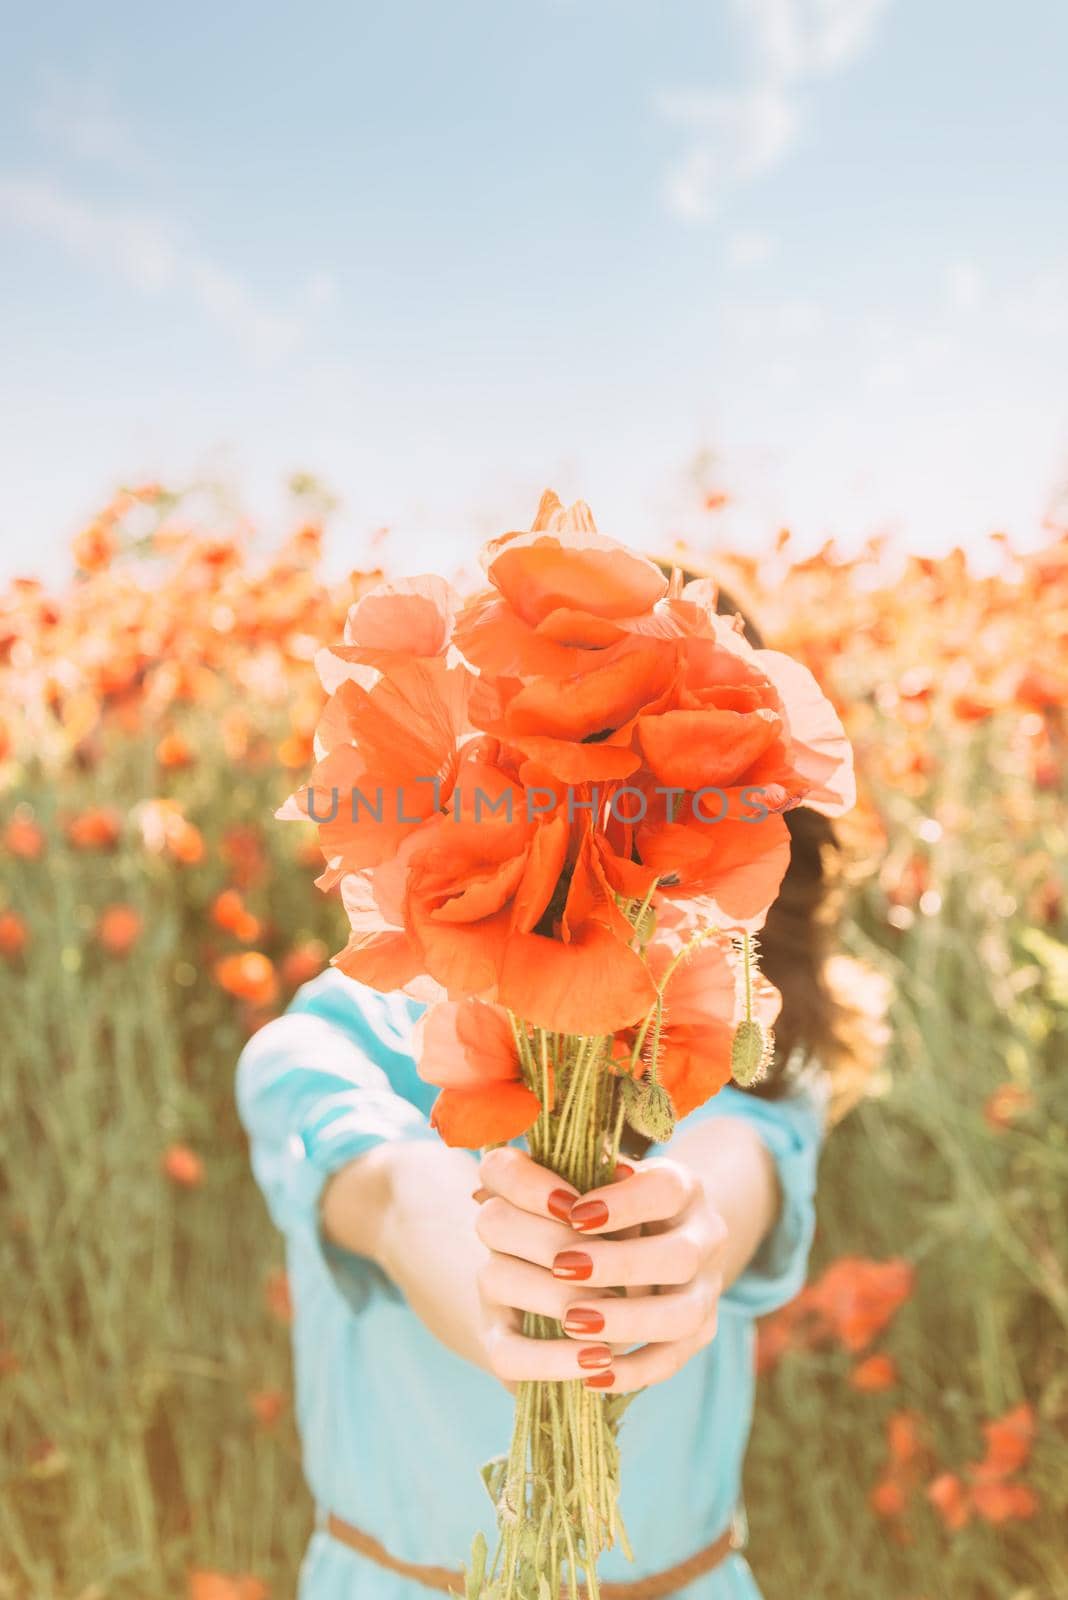 Unrecognizable woman giving a bouquet of red poppies. by alexAleksei